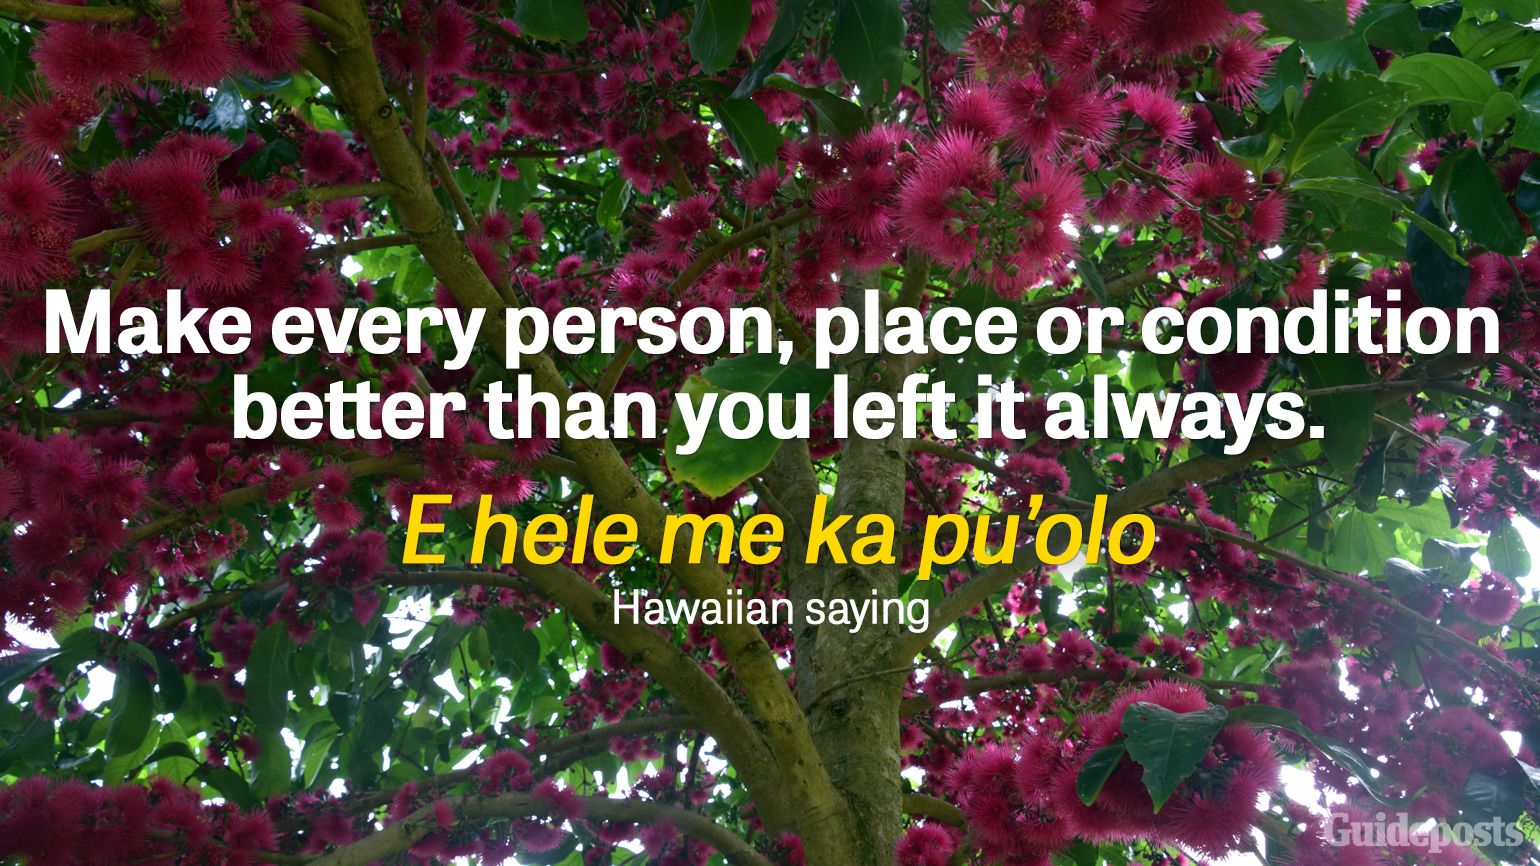 Make every person, place or condition better than you left it always.